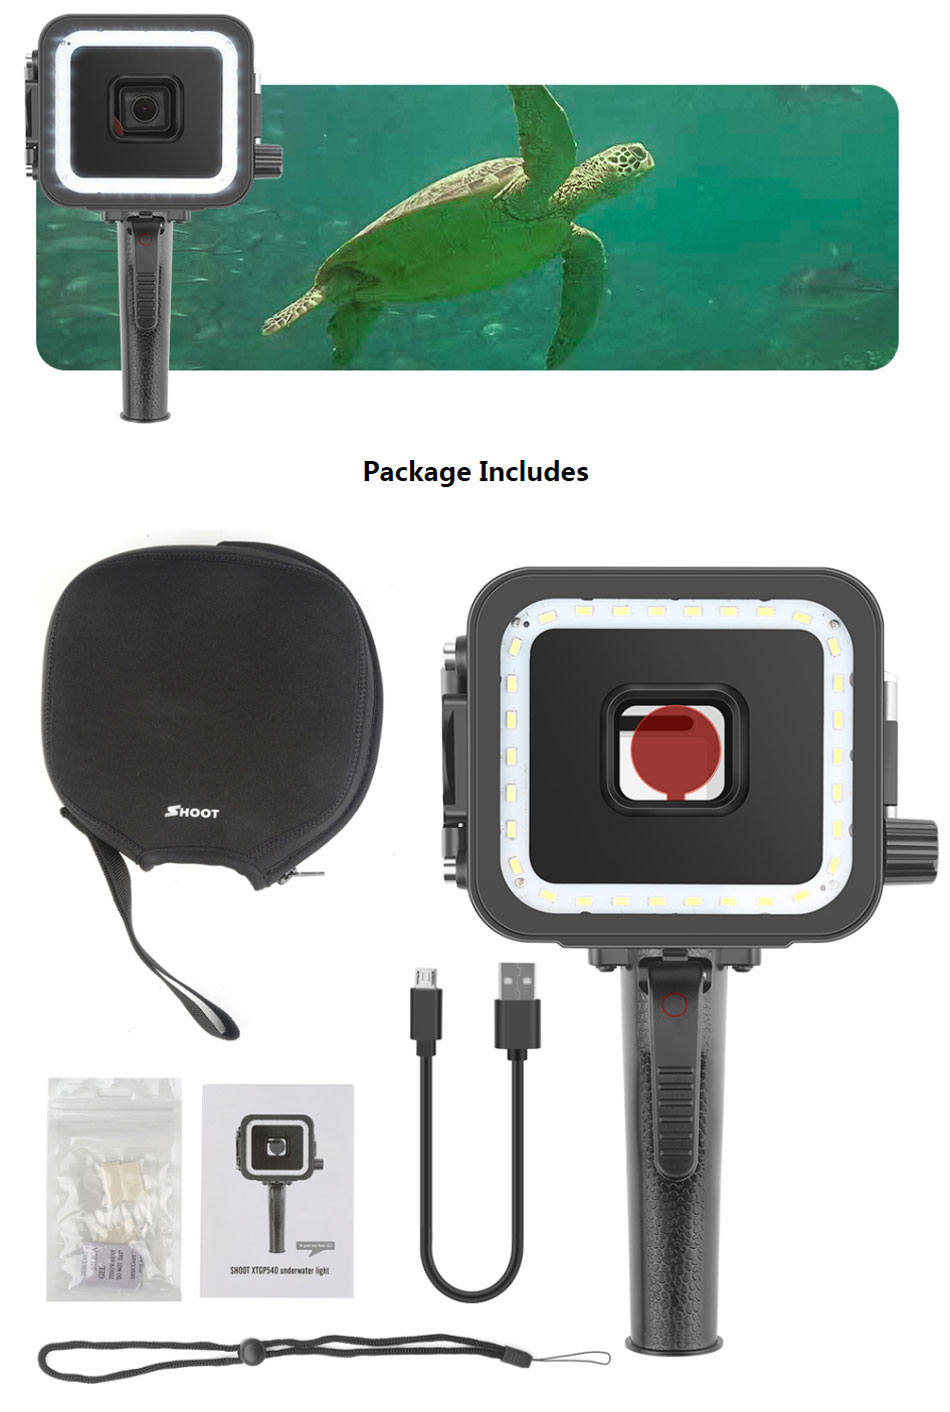 Shoot-XTGP540-35M-Waterproof-LED-Lamp-Diving-Video-Light-with-Red-Filter-for-GoPro-Hero-7-6-5-Black--1548052